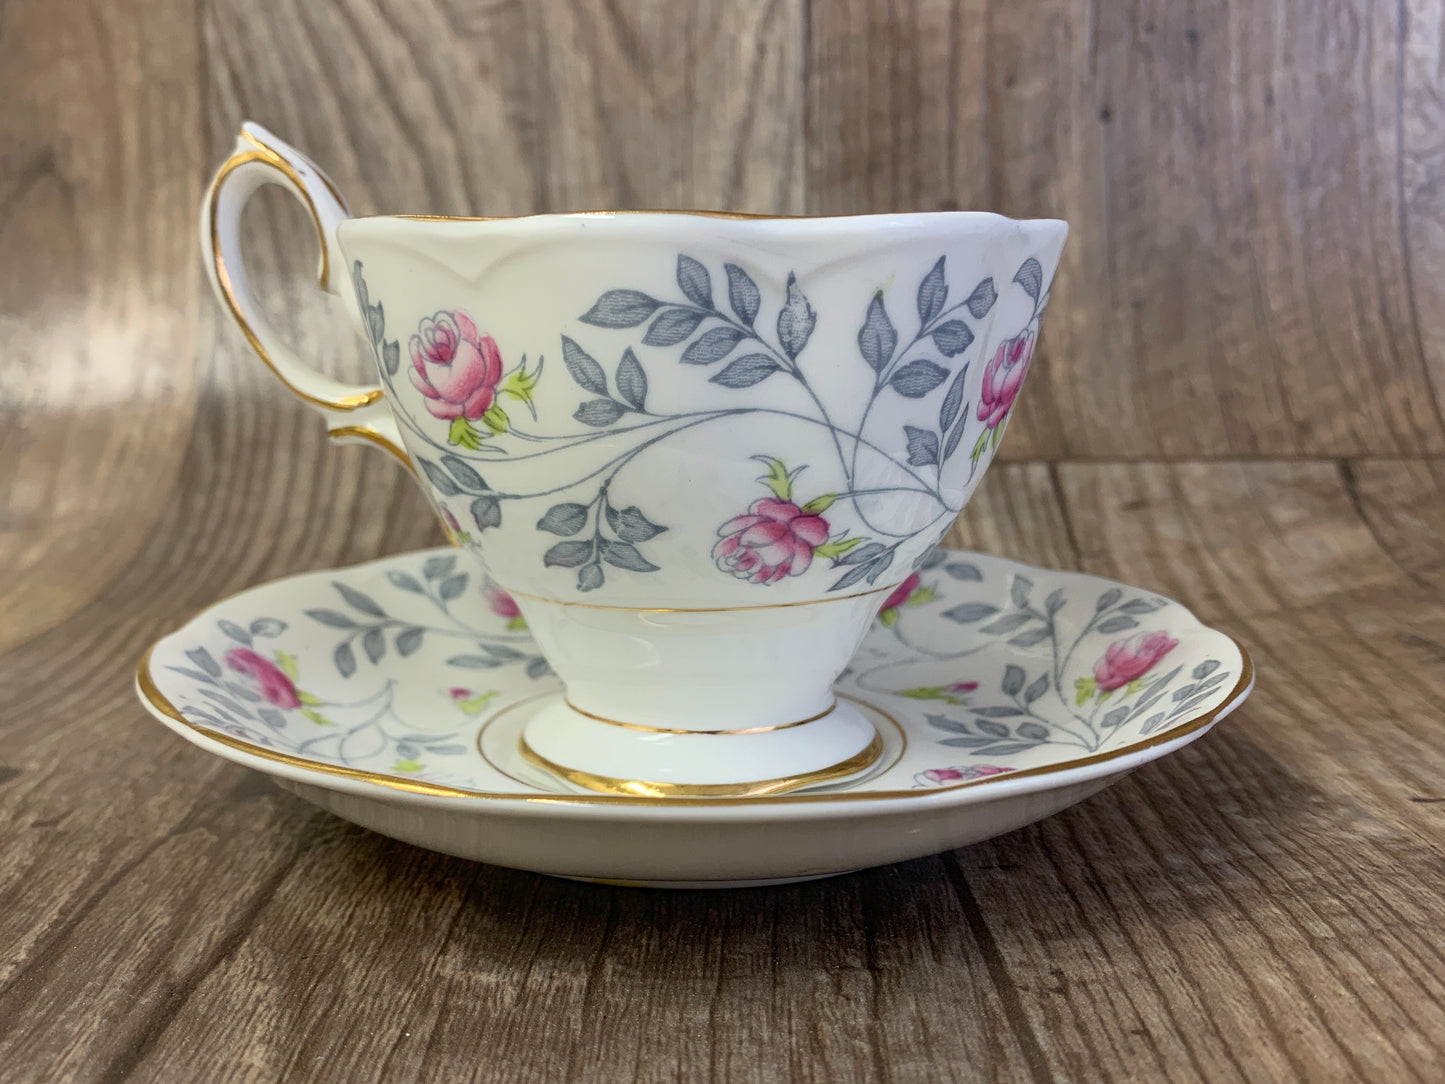 Grey and Pink Floral Tea Cup and Saucer Vintage Royal Albert Conway Pattern Teacup and Saucer